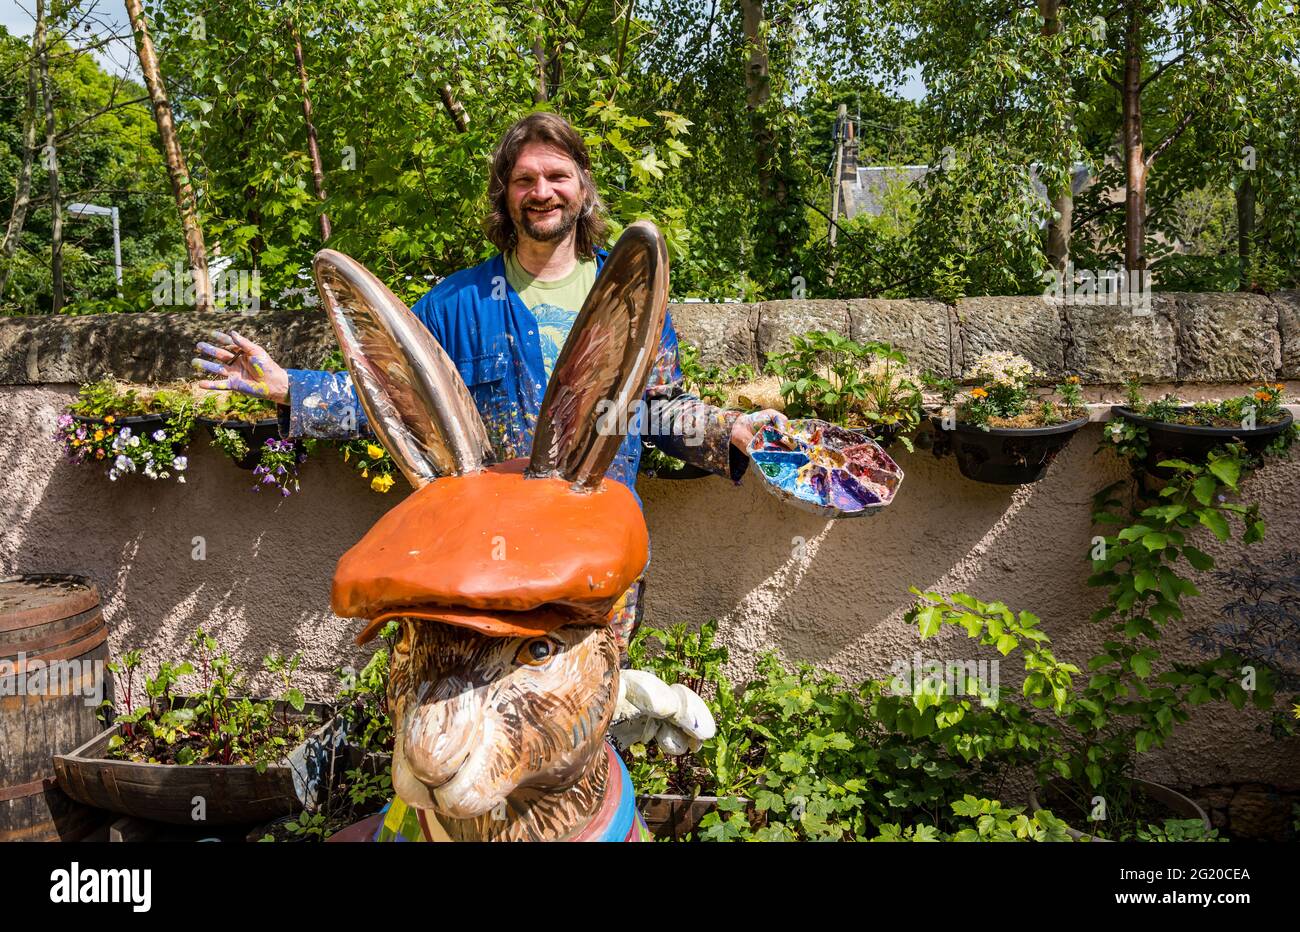 Artist Chris Rutterford paints a humorous giant fibreglass hare sculpture in his outdoor studio for a charity art trail, Scotland, UK Stock Photo